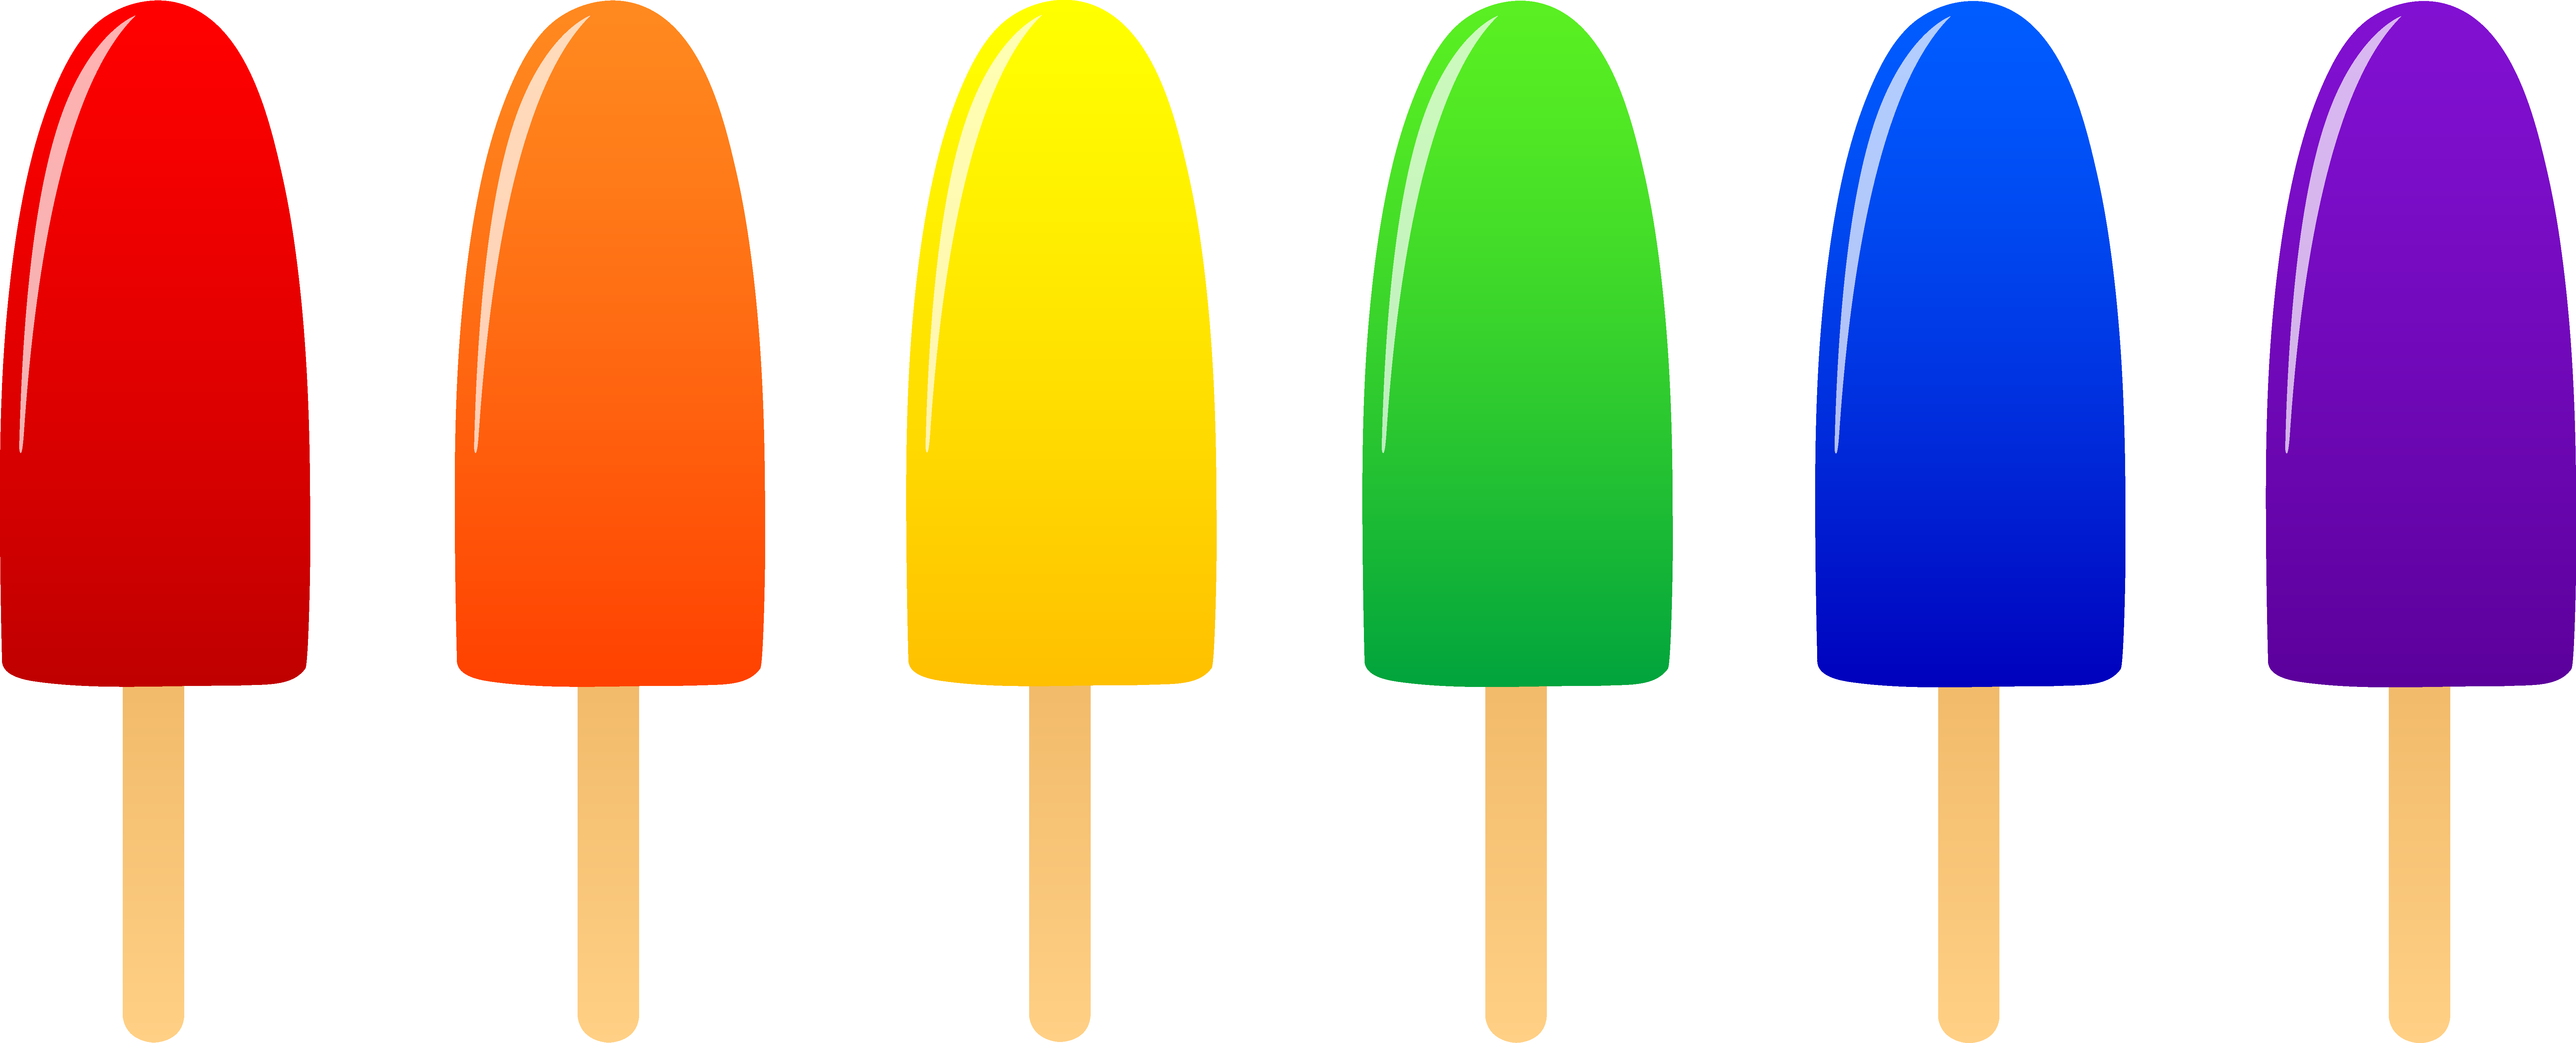 Ice Pops drawing free image download